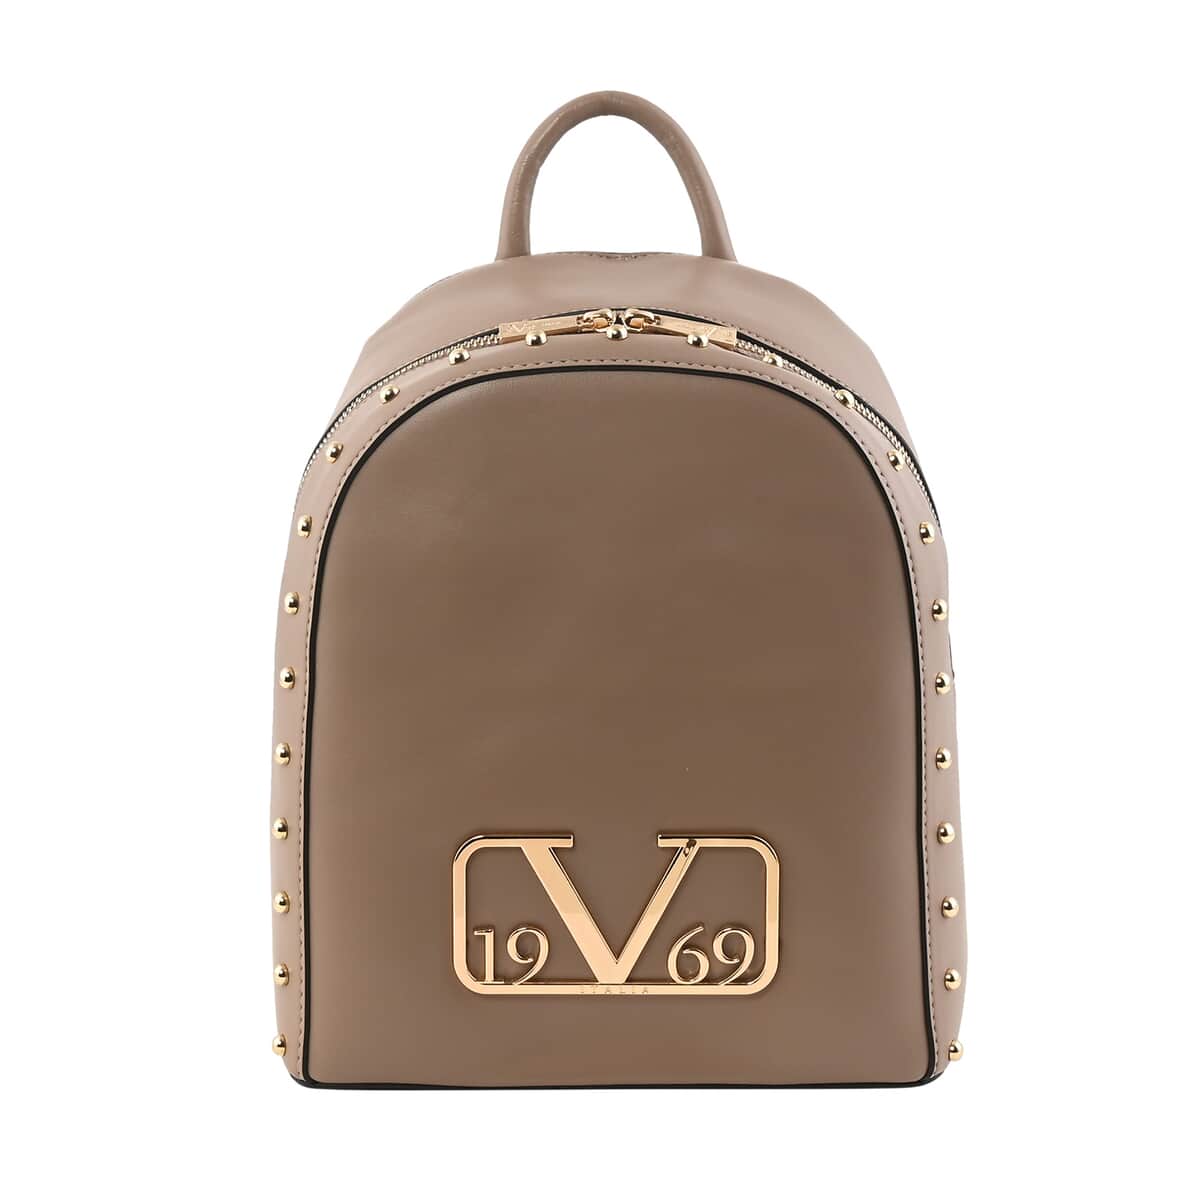 19V69 ITALIA by Alessandro Versace Smooth Texture Faux Leather Backpack with Detachable Strap - Beige (12X9.5X4.75) image number 0